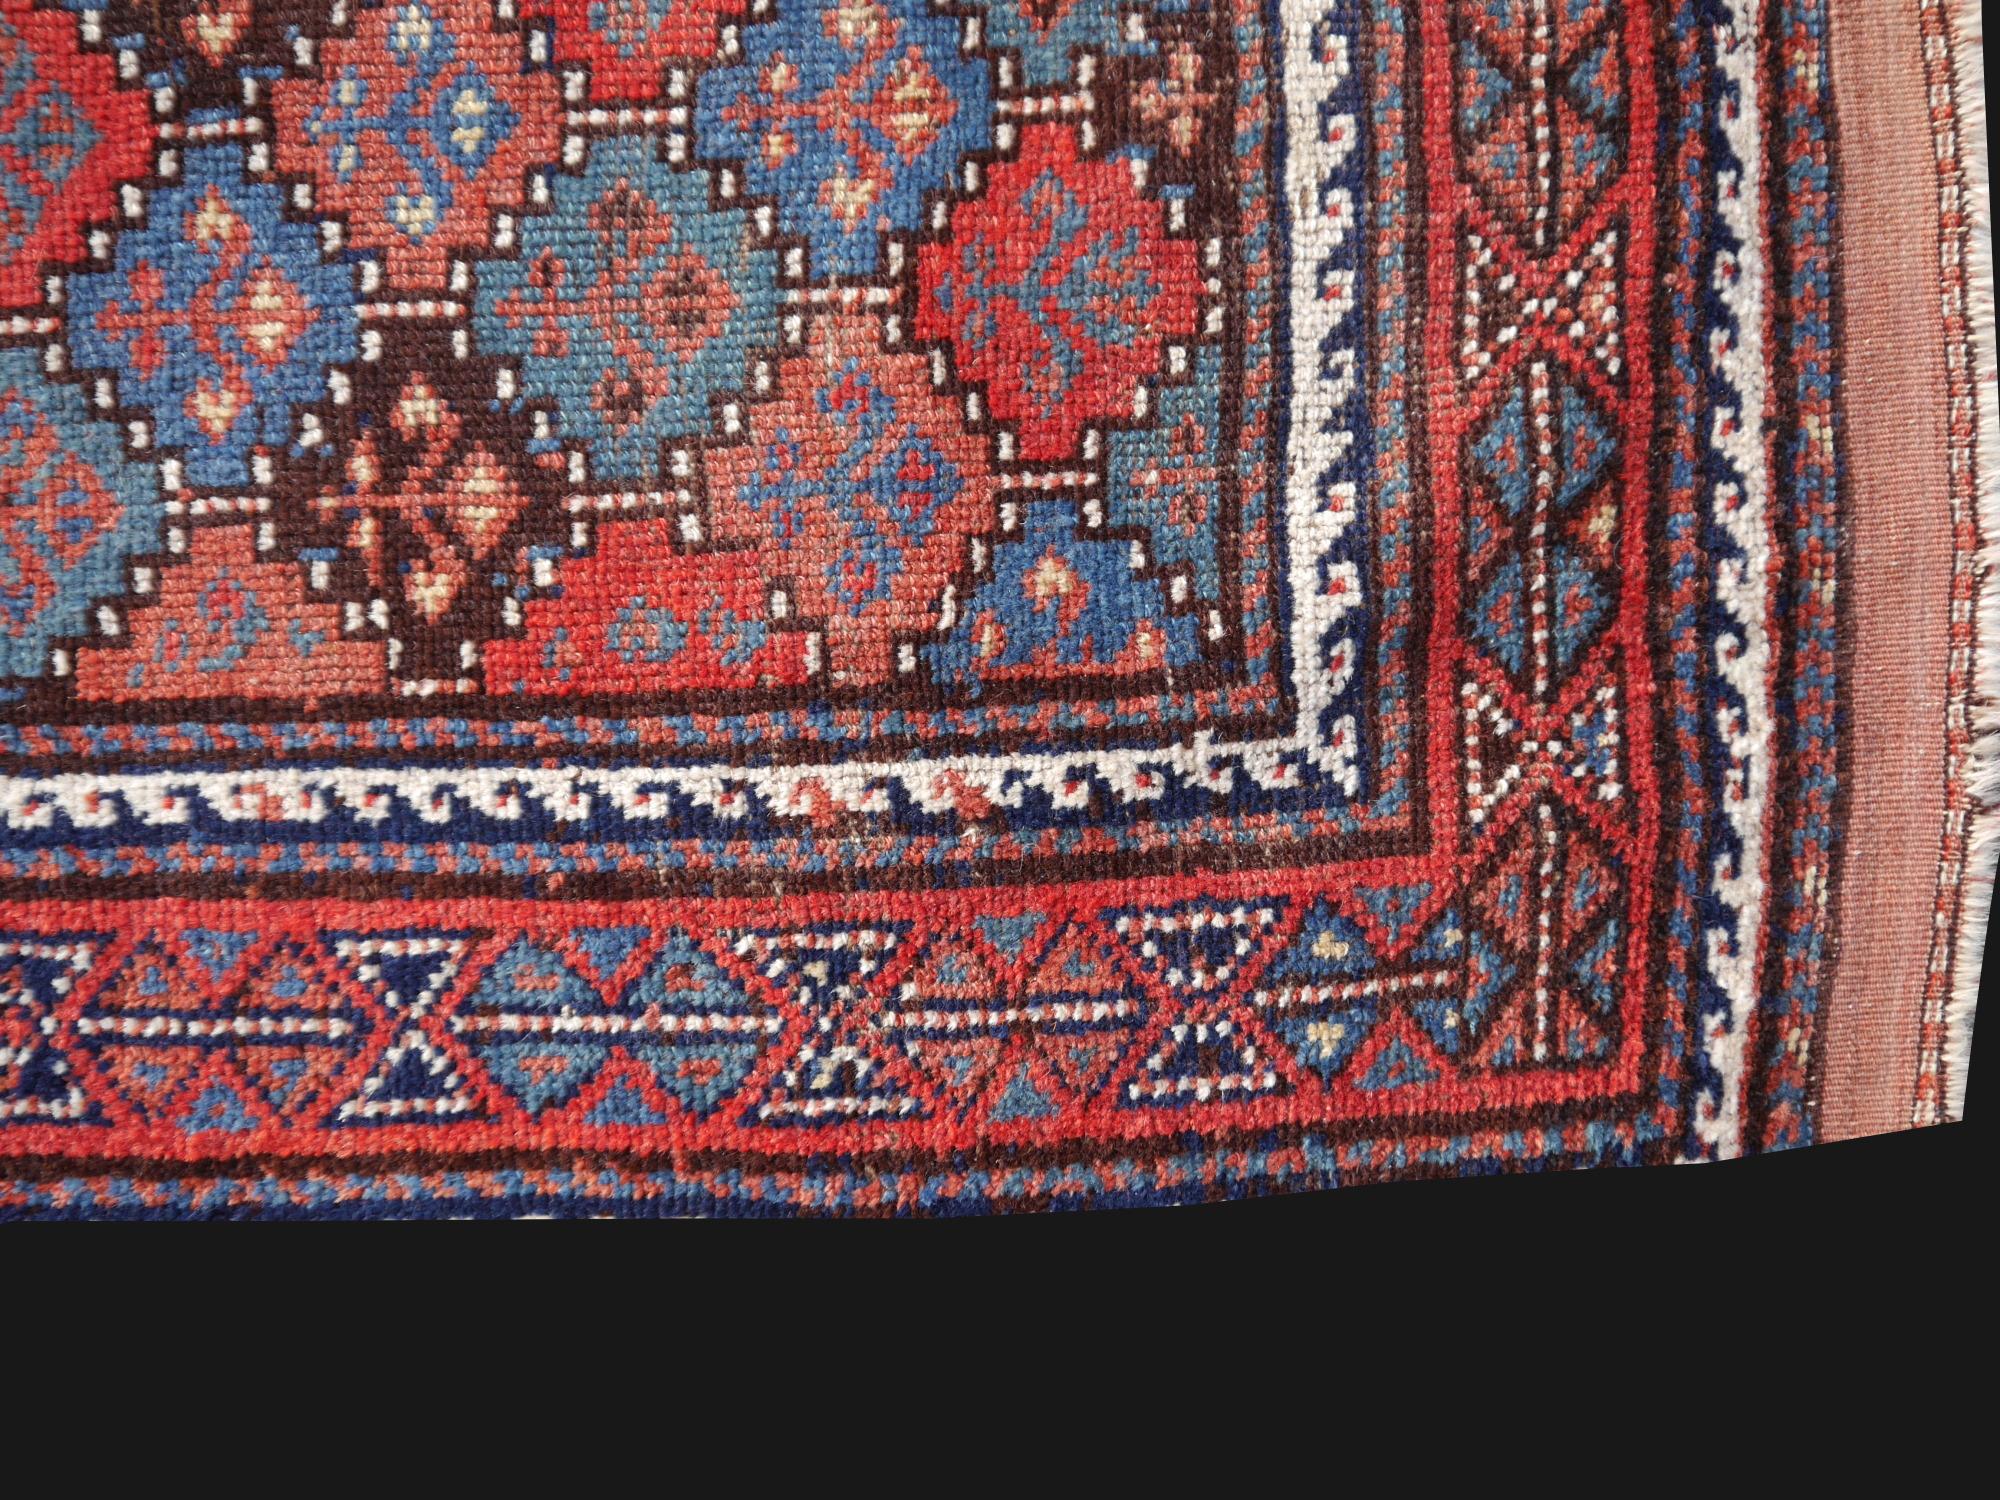 Antique Caucasian rug.

A beautiful antique rug from Azerbeijan. 
• Beautiful colors
• All handmade
• Pile pure wool
• Traditional Design
• Condition: Very good, wool pile on wool warp and weft.

All of our rugs, carpets and Kilims are original